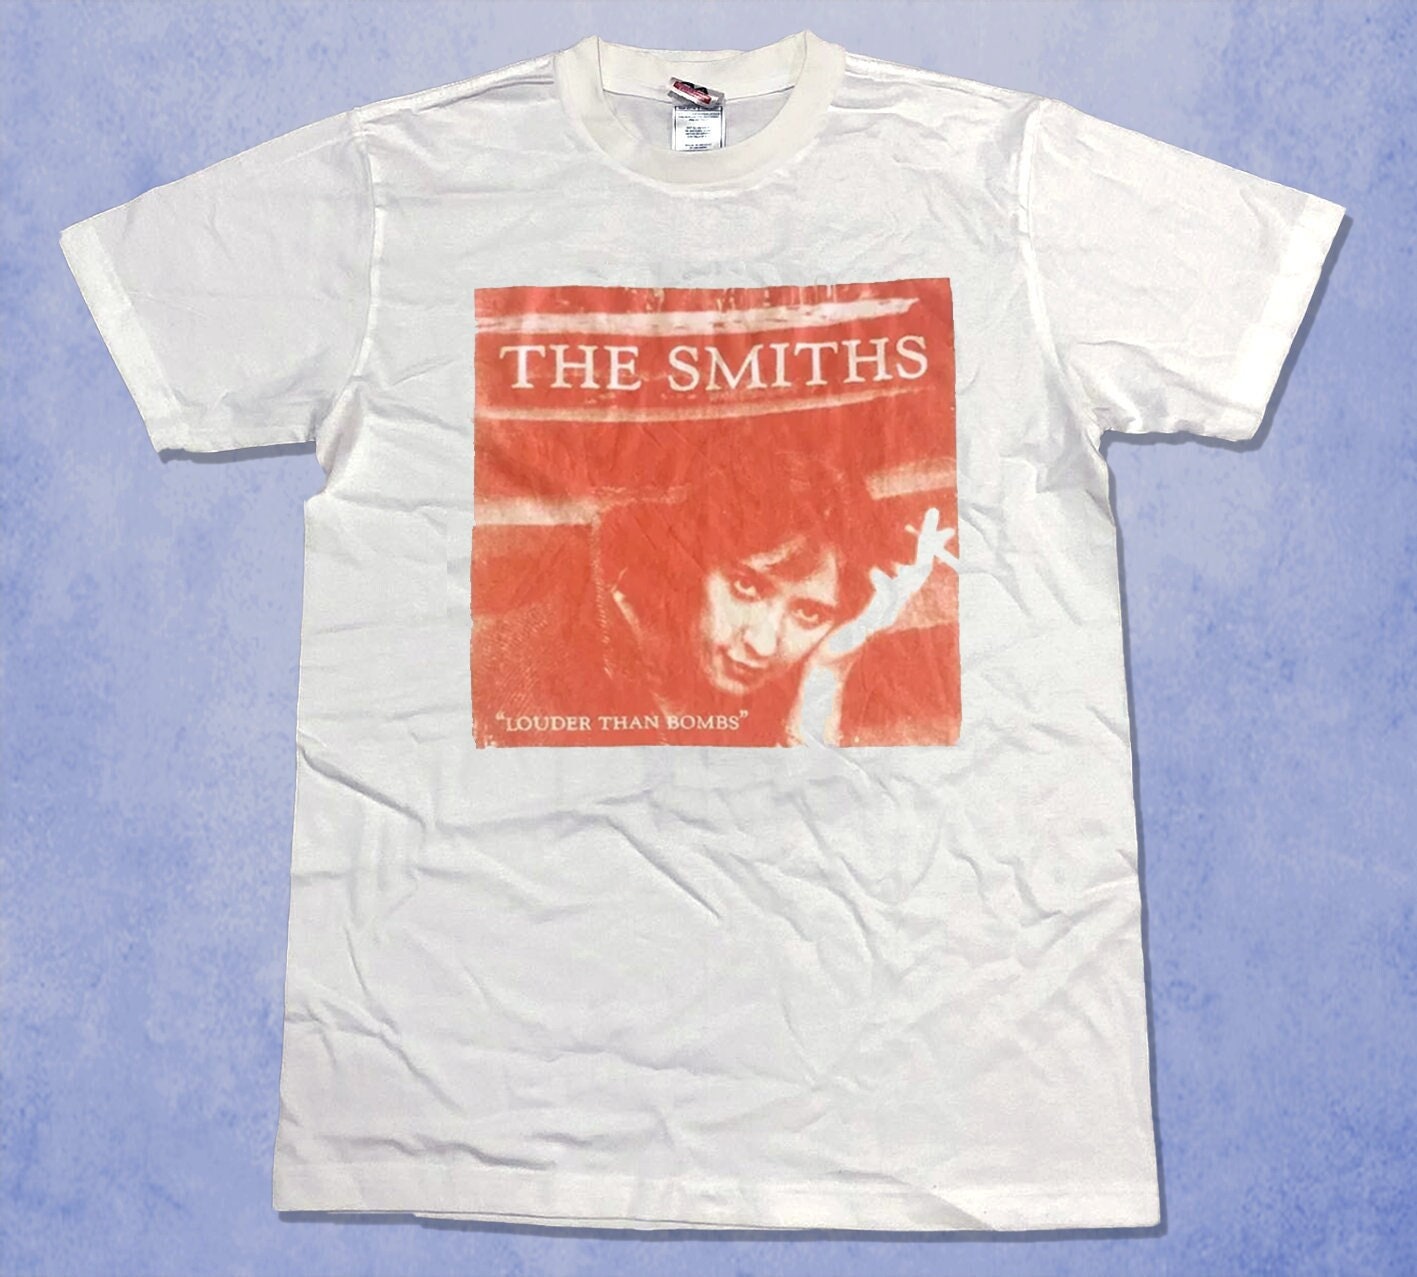 The Smiths "Louder than Bombs" T-shirt